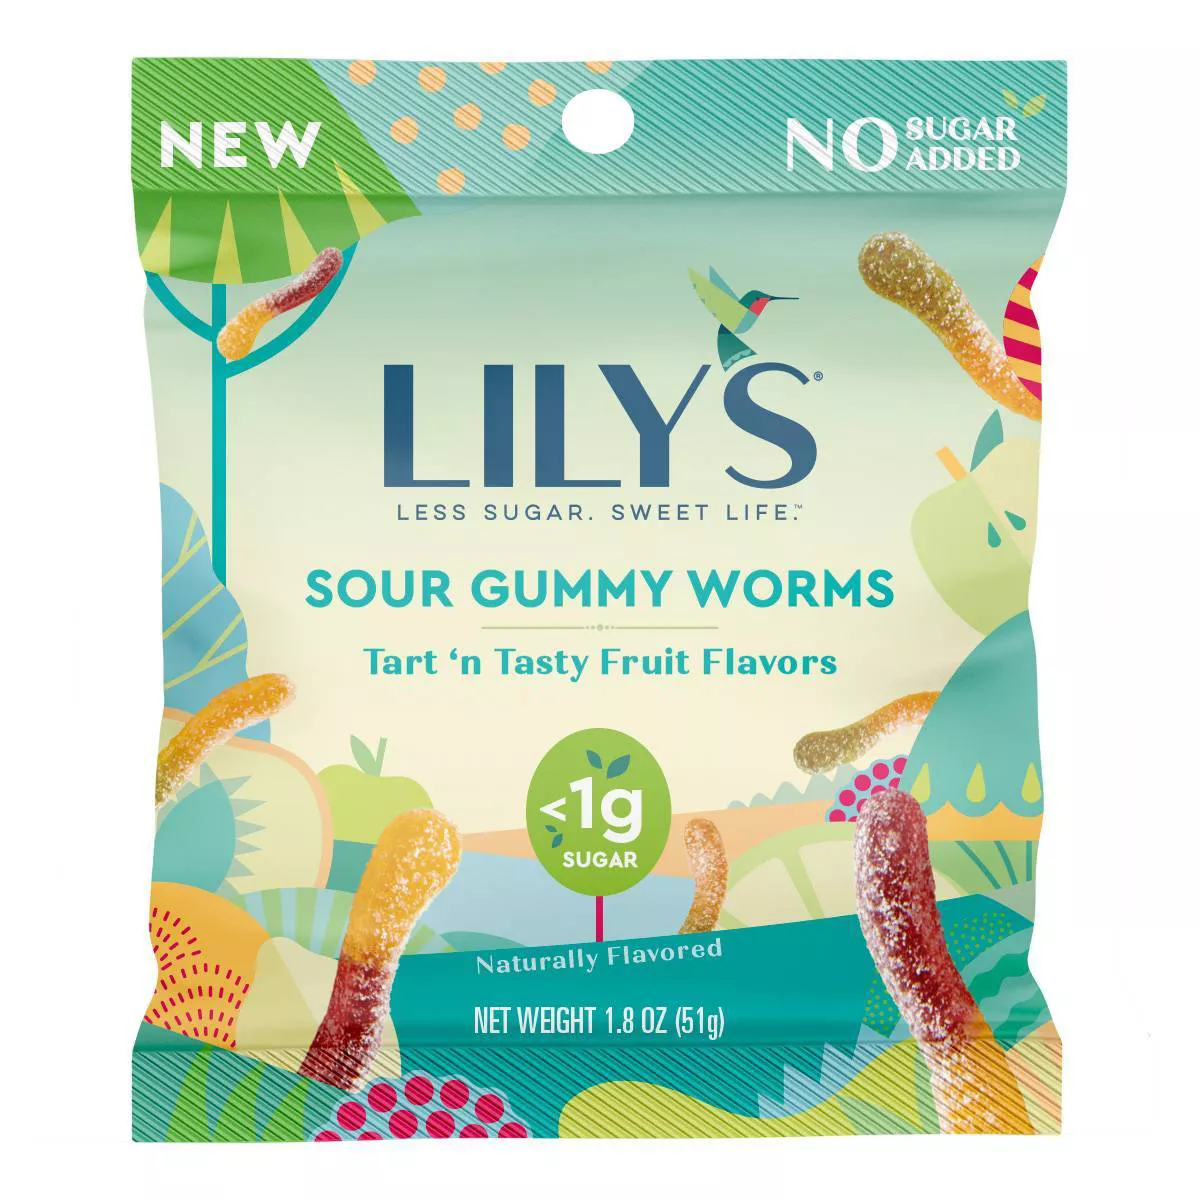 Lily's sour gummy worms